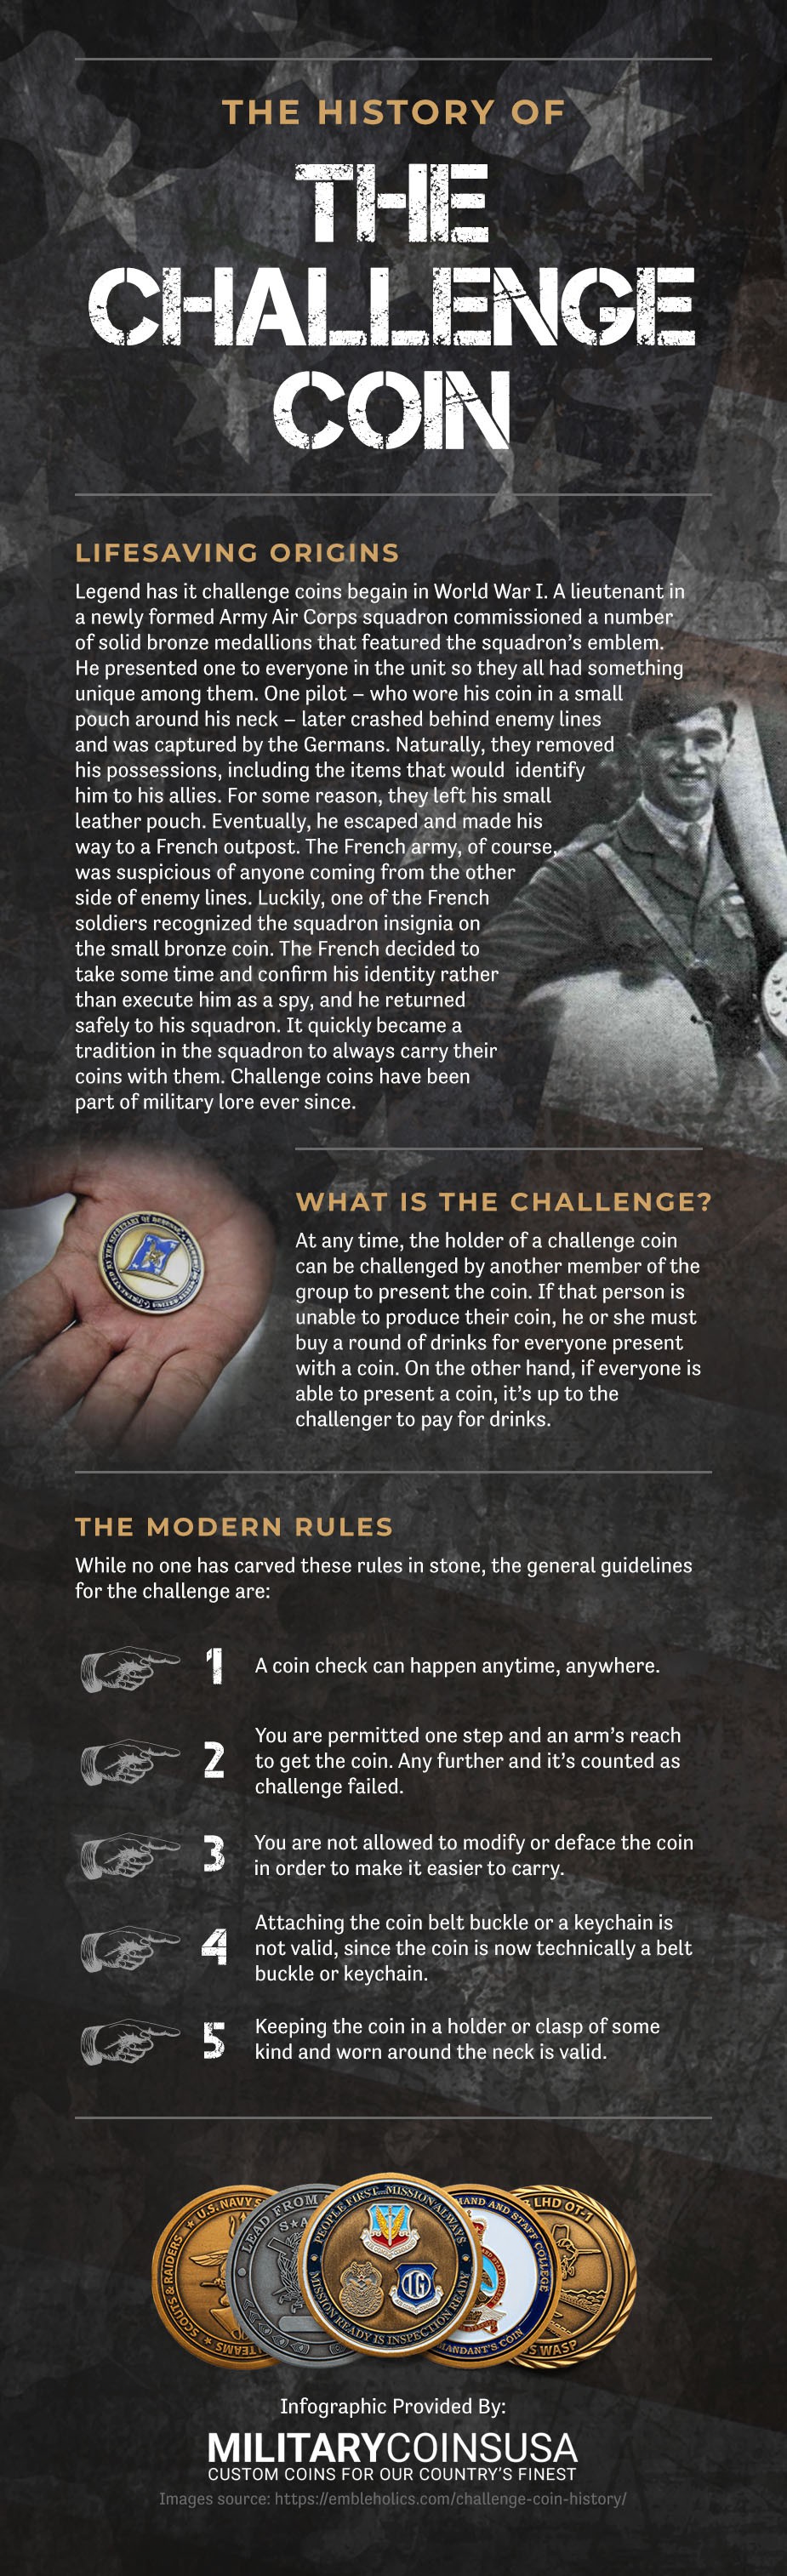 Military Coin Info Graphic